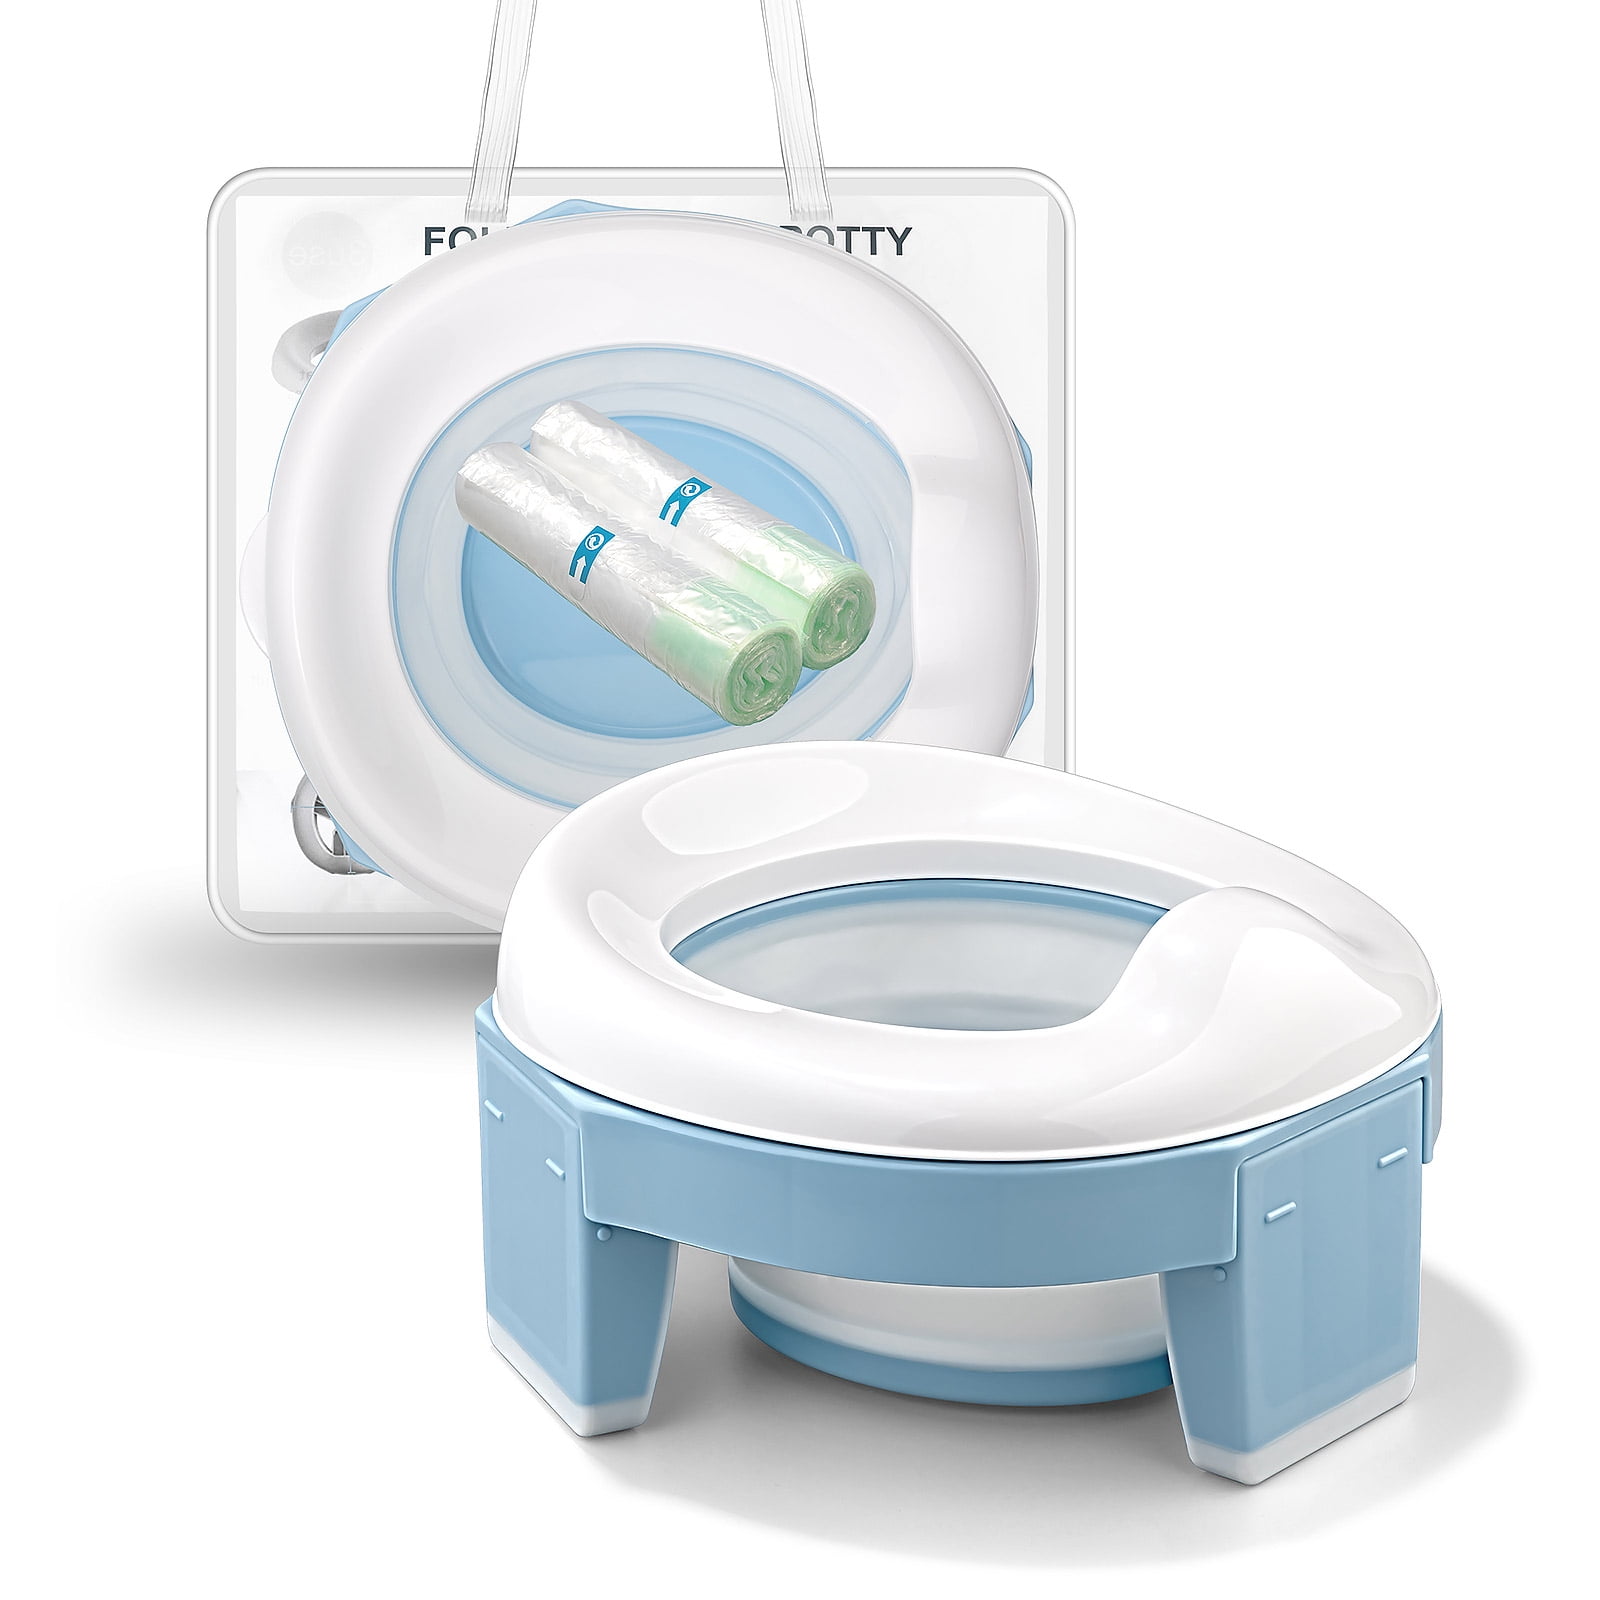 OKAYC Travel Potty Portable Potty Training Seat for Toddler Kids Foldable Toilet Seat Baby Potty Seat for Indoor and Outdoor Blue